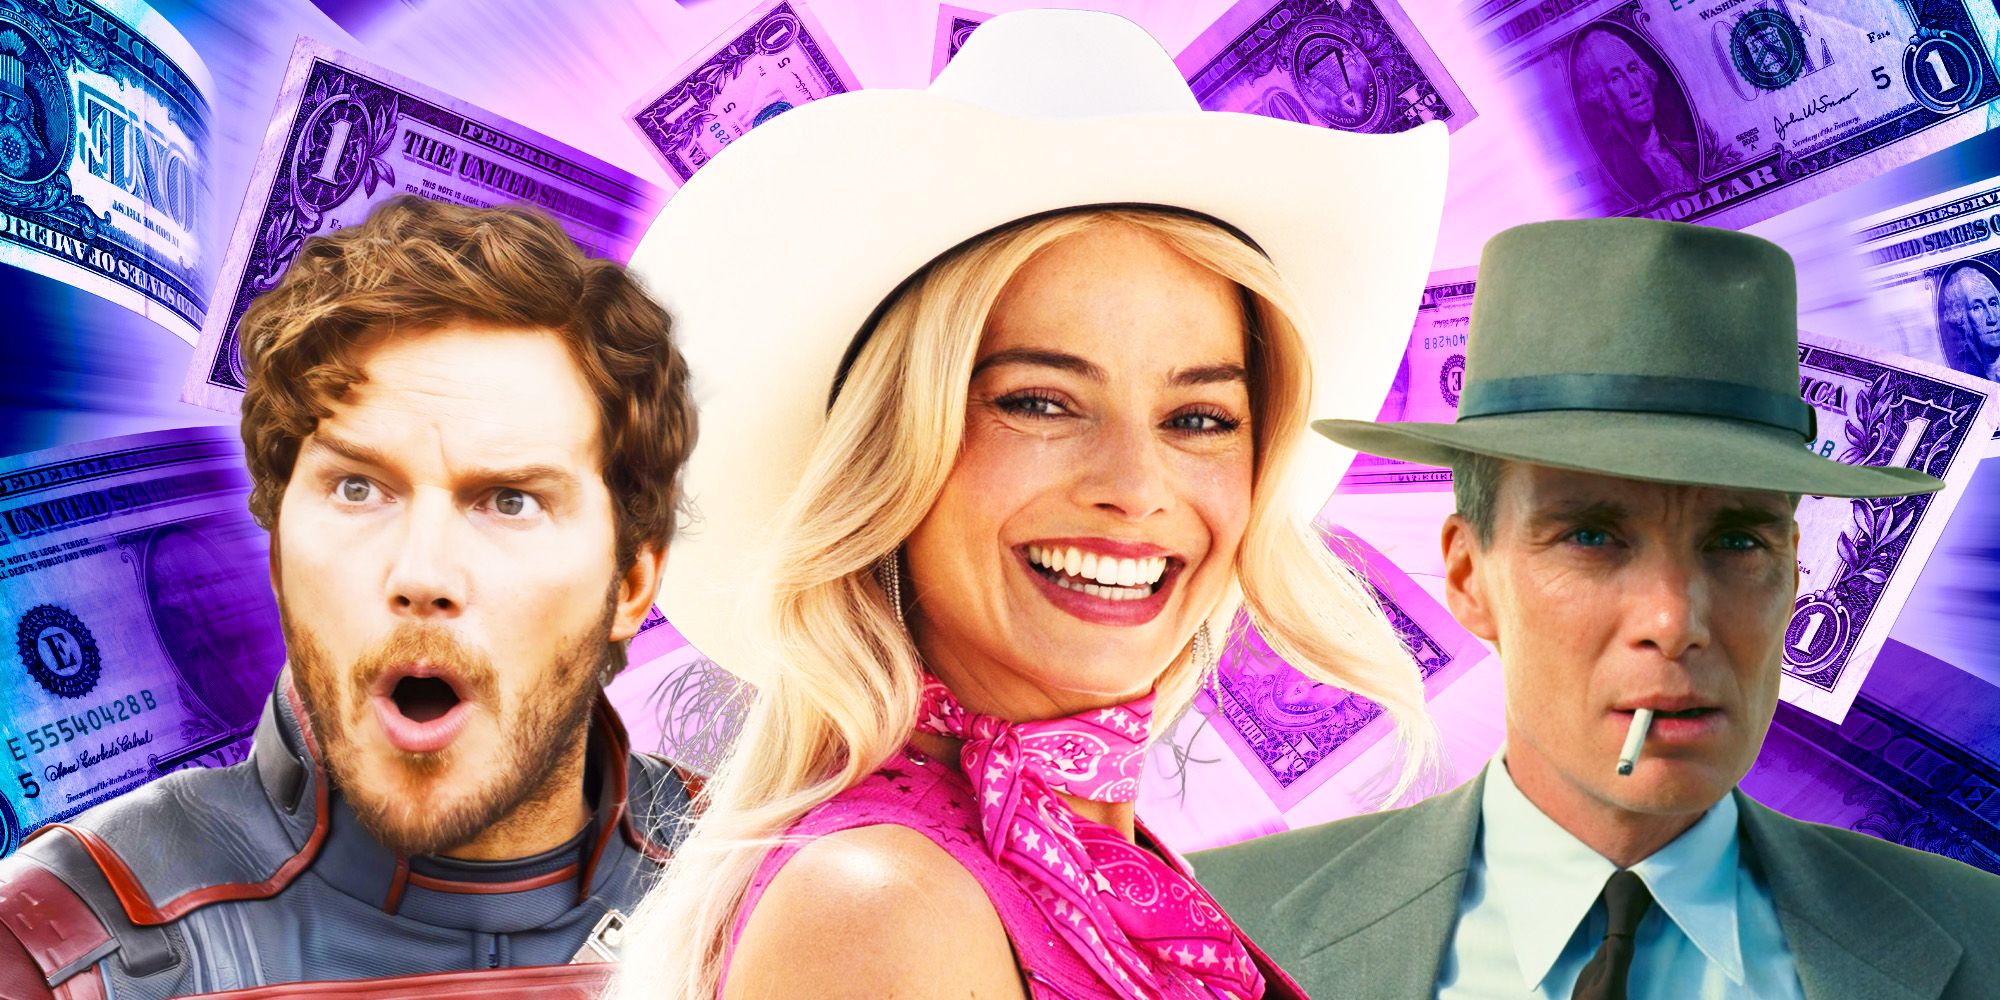 Star-Lord surprised in Guardians of the Galaxy Vol. 3, Barbie smiling in Barbie, and J. Robert Oppenheimer smoking a cigarette in Oppenheimer with money behind them